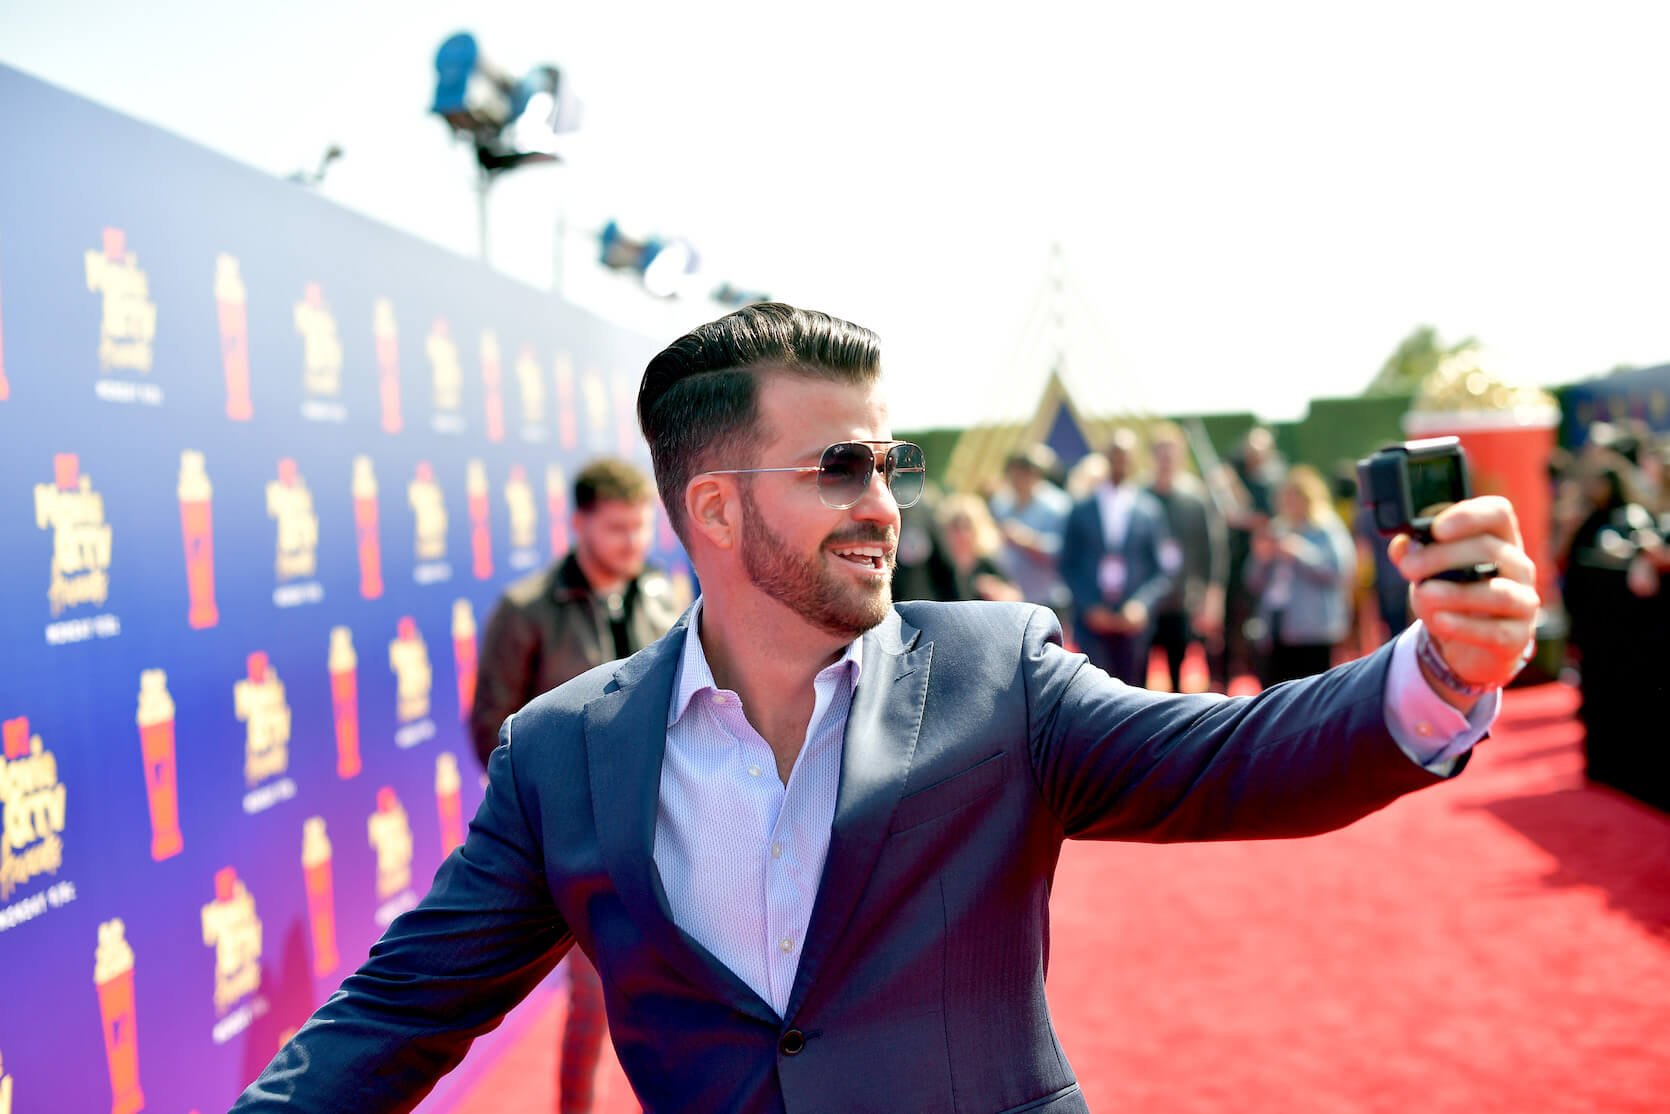 MTV's 'The Challenge' star Johnny 'Bananas' Devenanzio taking a selfie while on the red carpet. Johnny 'Bananas' could appear in the 'Bachelor in Paradise' cast